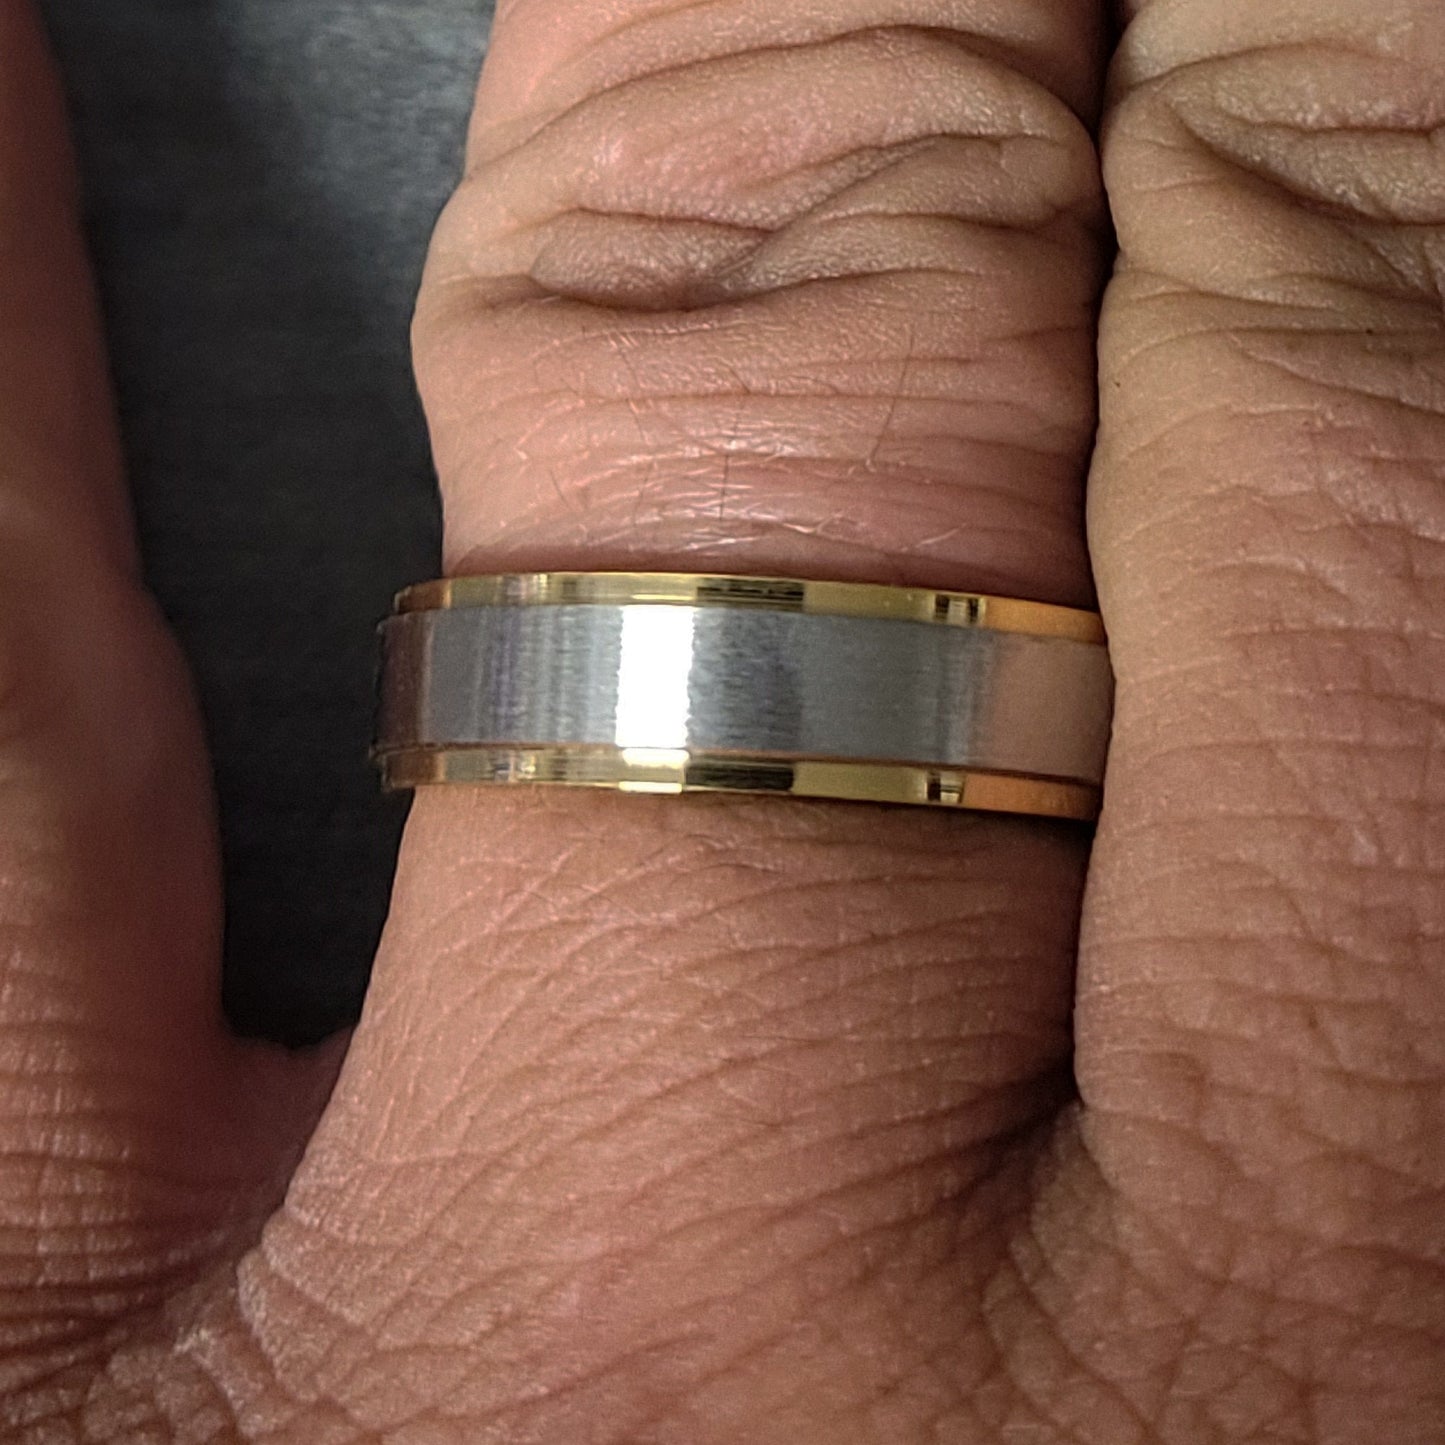 Think Engraved wedding Band Personalized Engraved Men's Gold and Steel Wedding Ring - Engraved Handwriting Ring